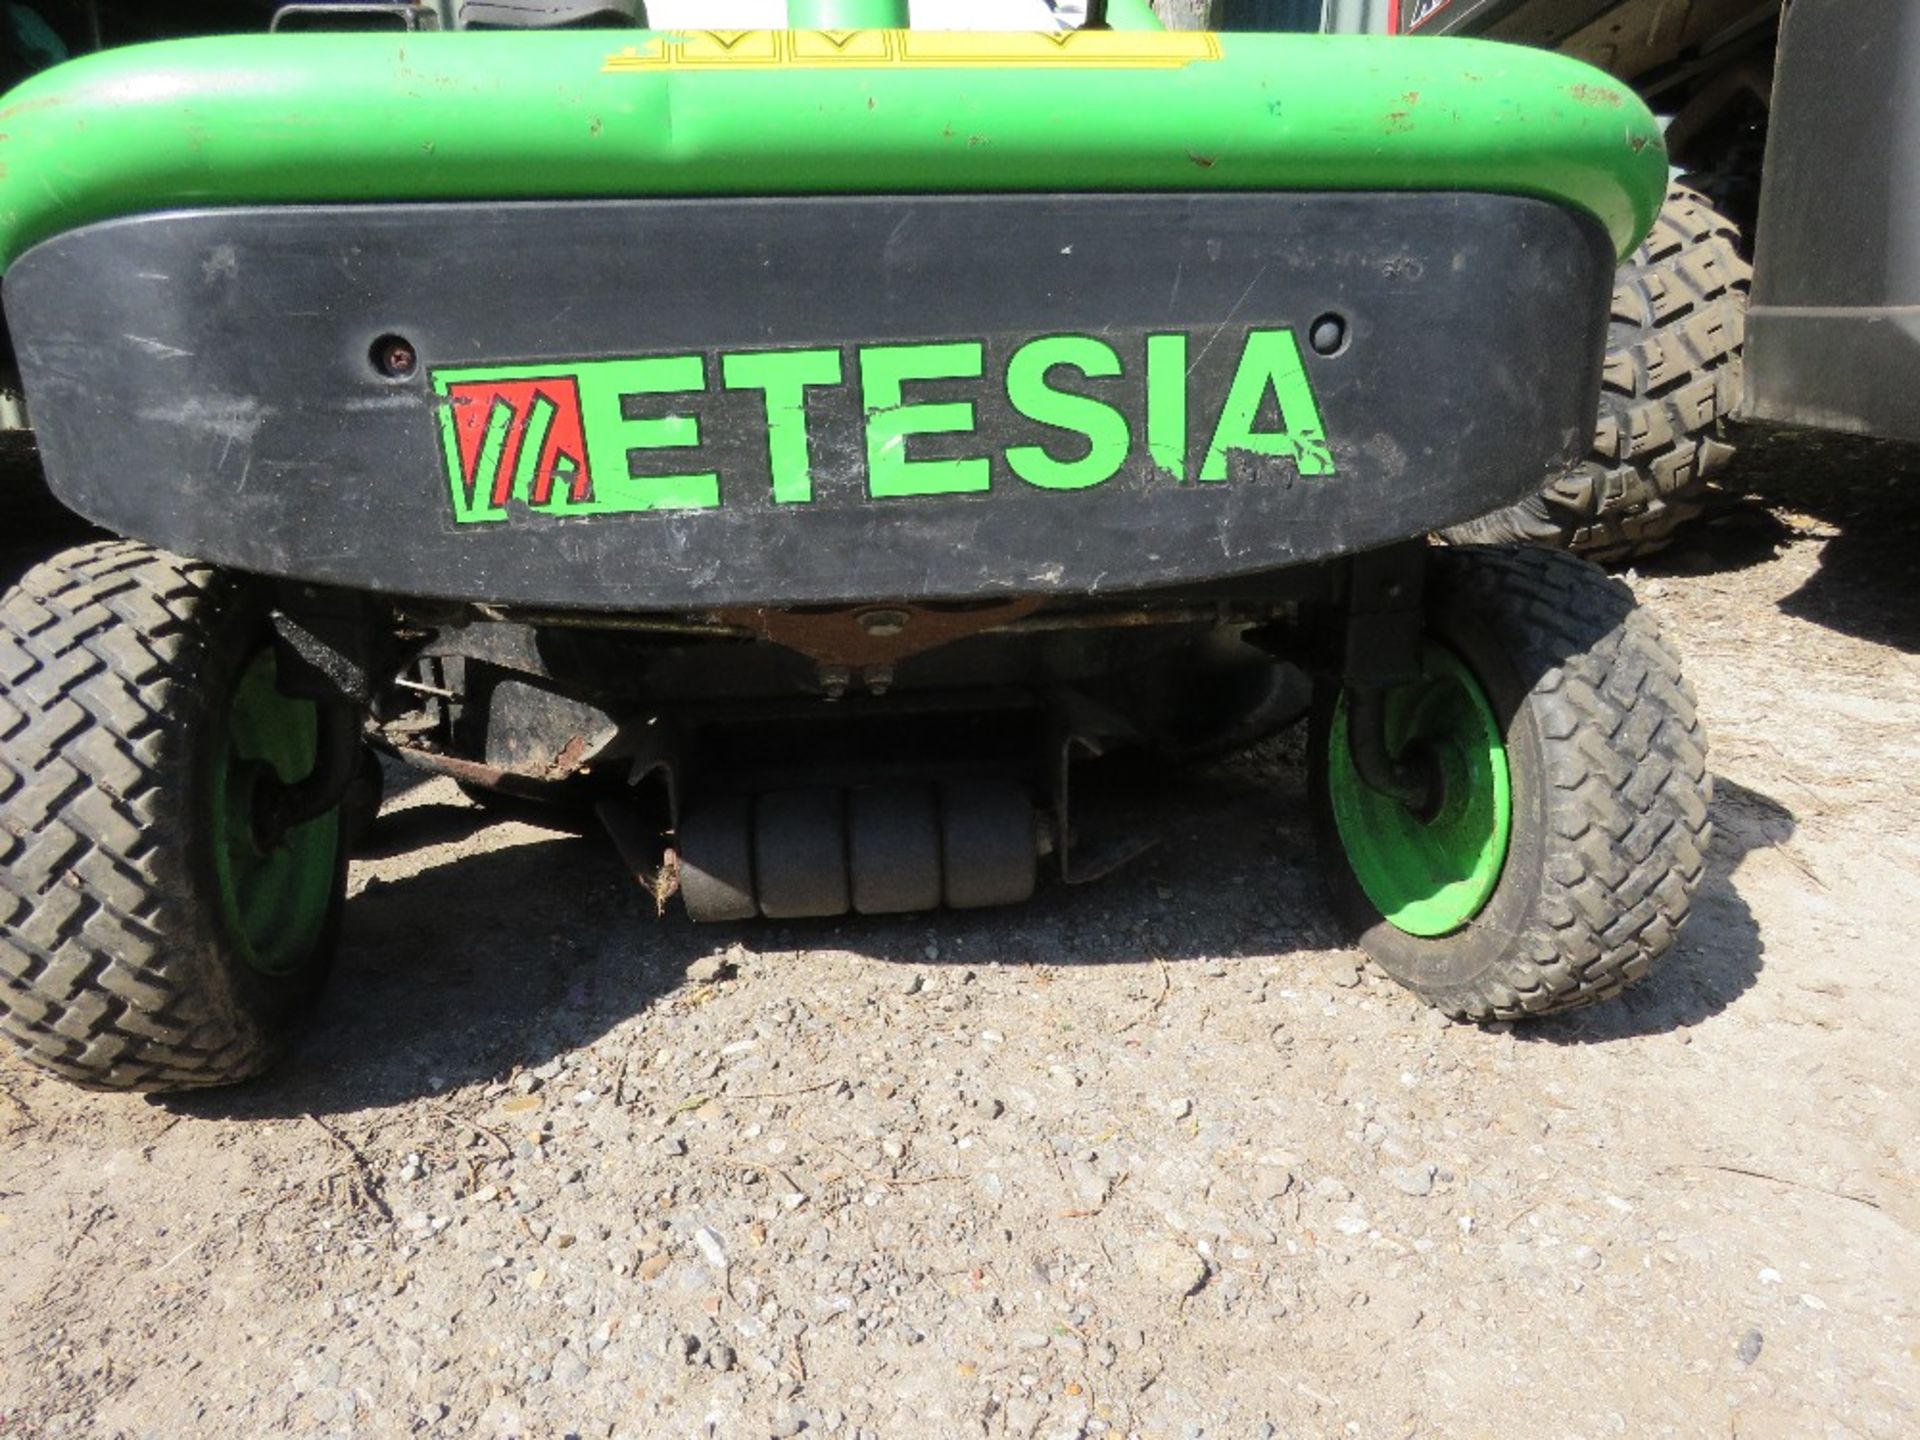 ETESIA PROFESSIONAL HYDRO RIDE ON MOWER WITH REAR COLLECTOR. WHEN TESTED WAS SEEN TO RUN AND DRIVE A - Image 9 of 9